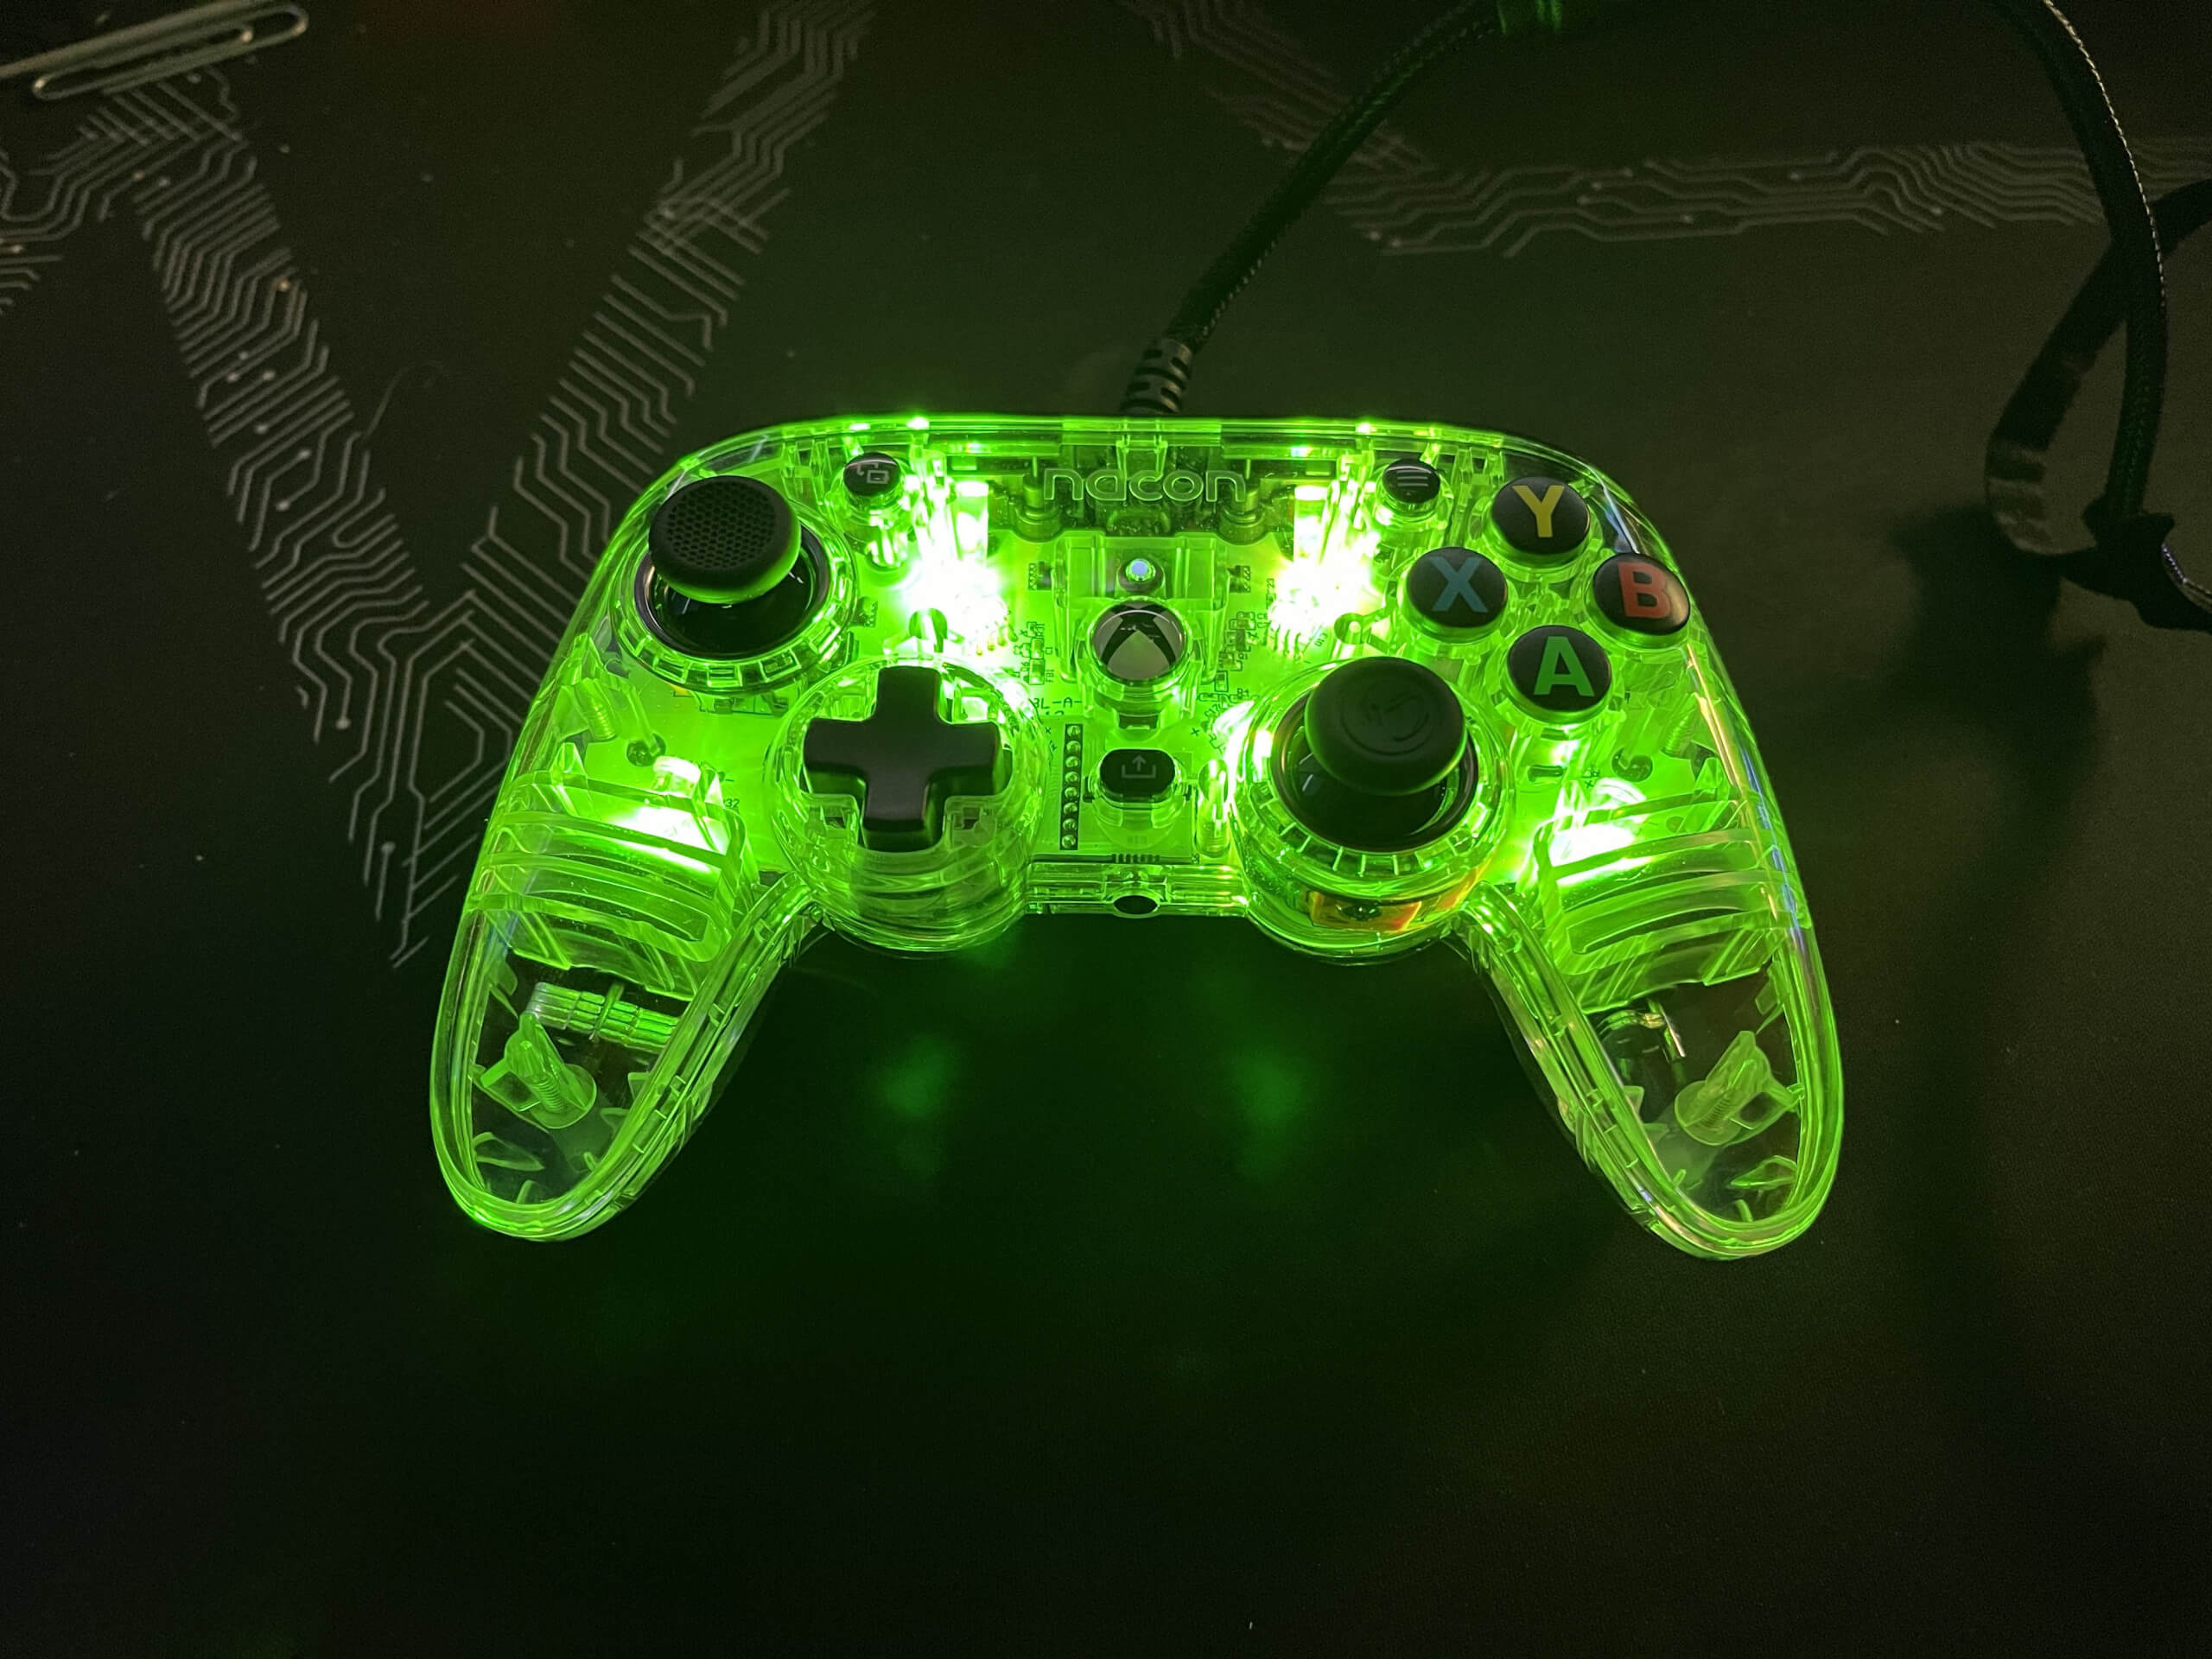 The Nacon Colorlight controller is a clear build with internal diodes that can be set to various colors and patterns. This controller is shown with all the diodes lit green.